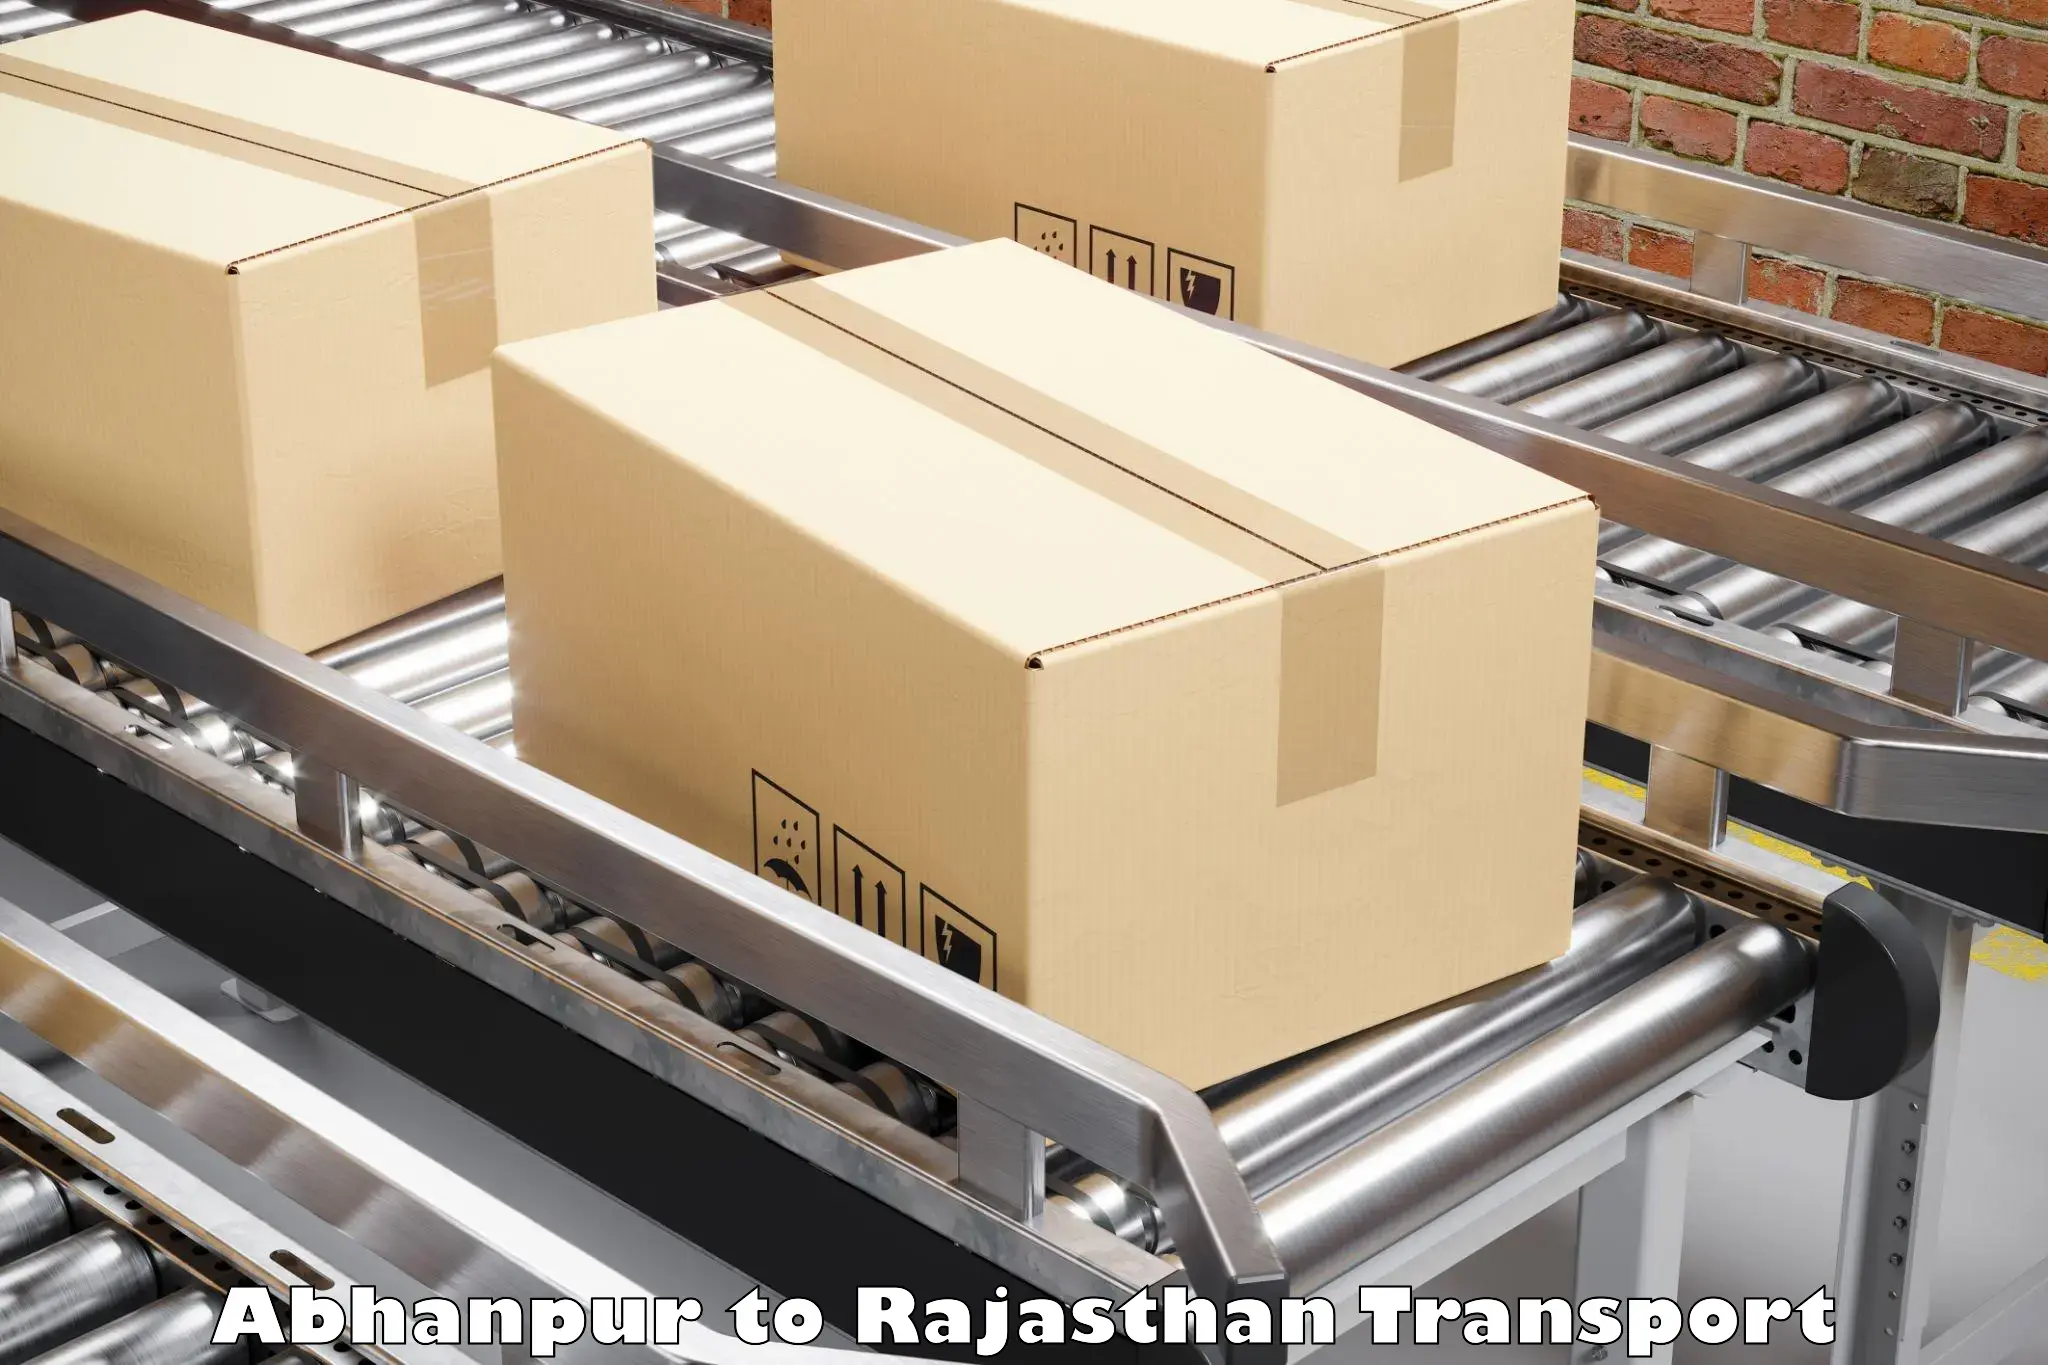 Daily parcel service transport Abhanpur to Abu Road